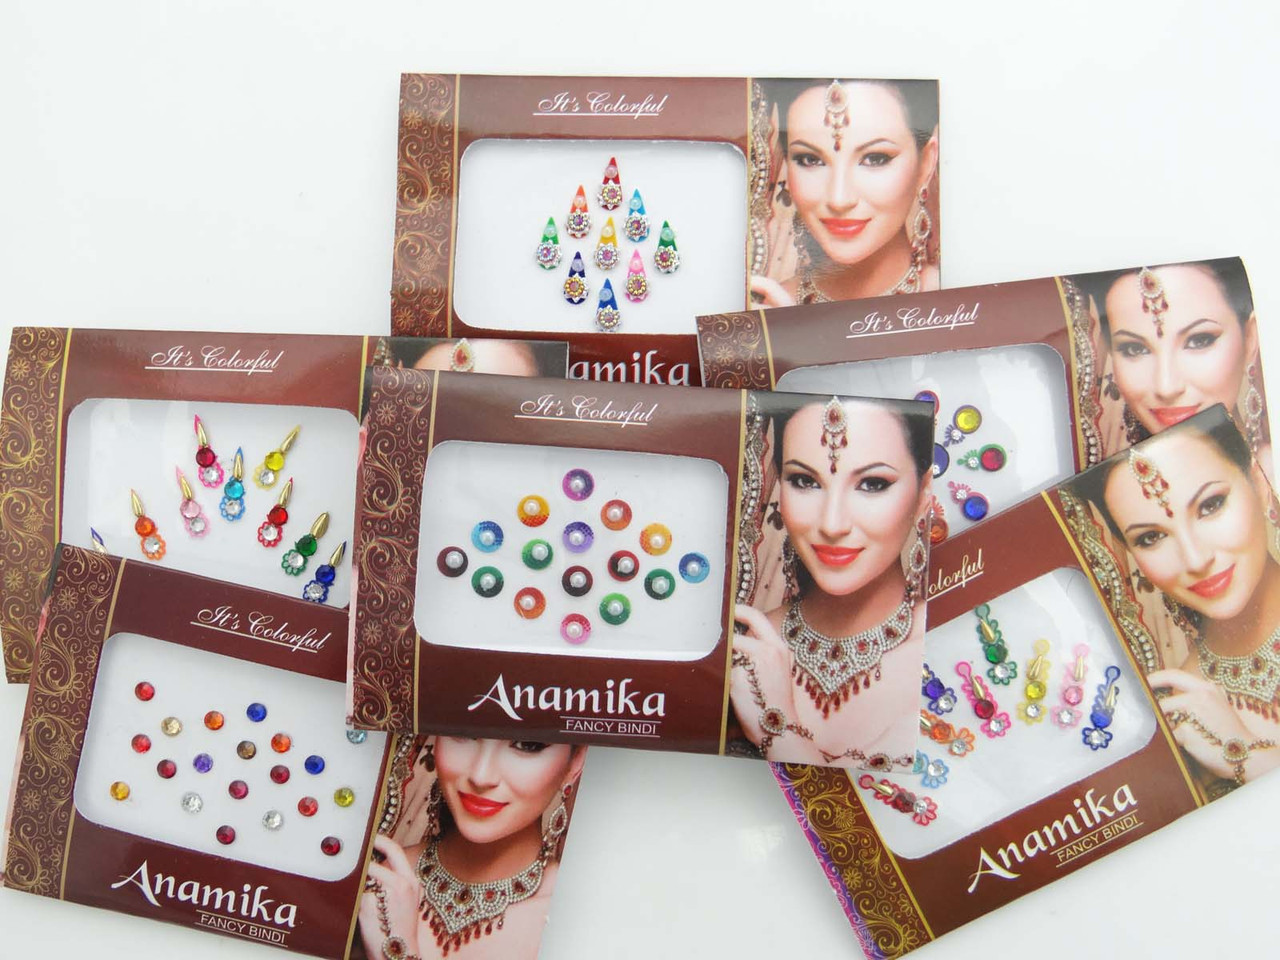 Bindi, Hair Accessories & Body Beautification Products